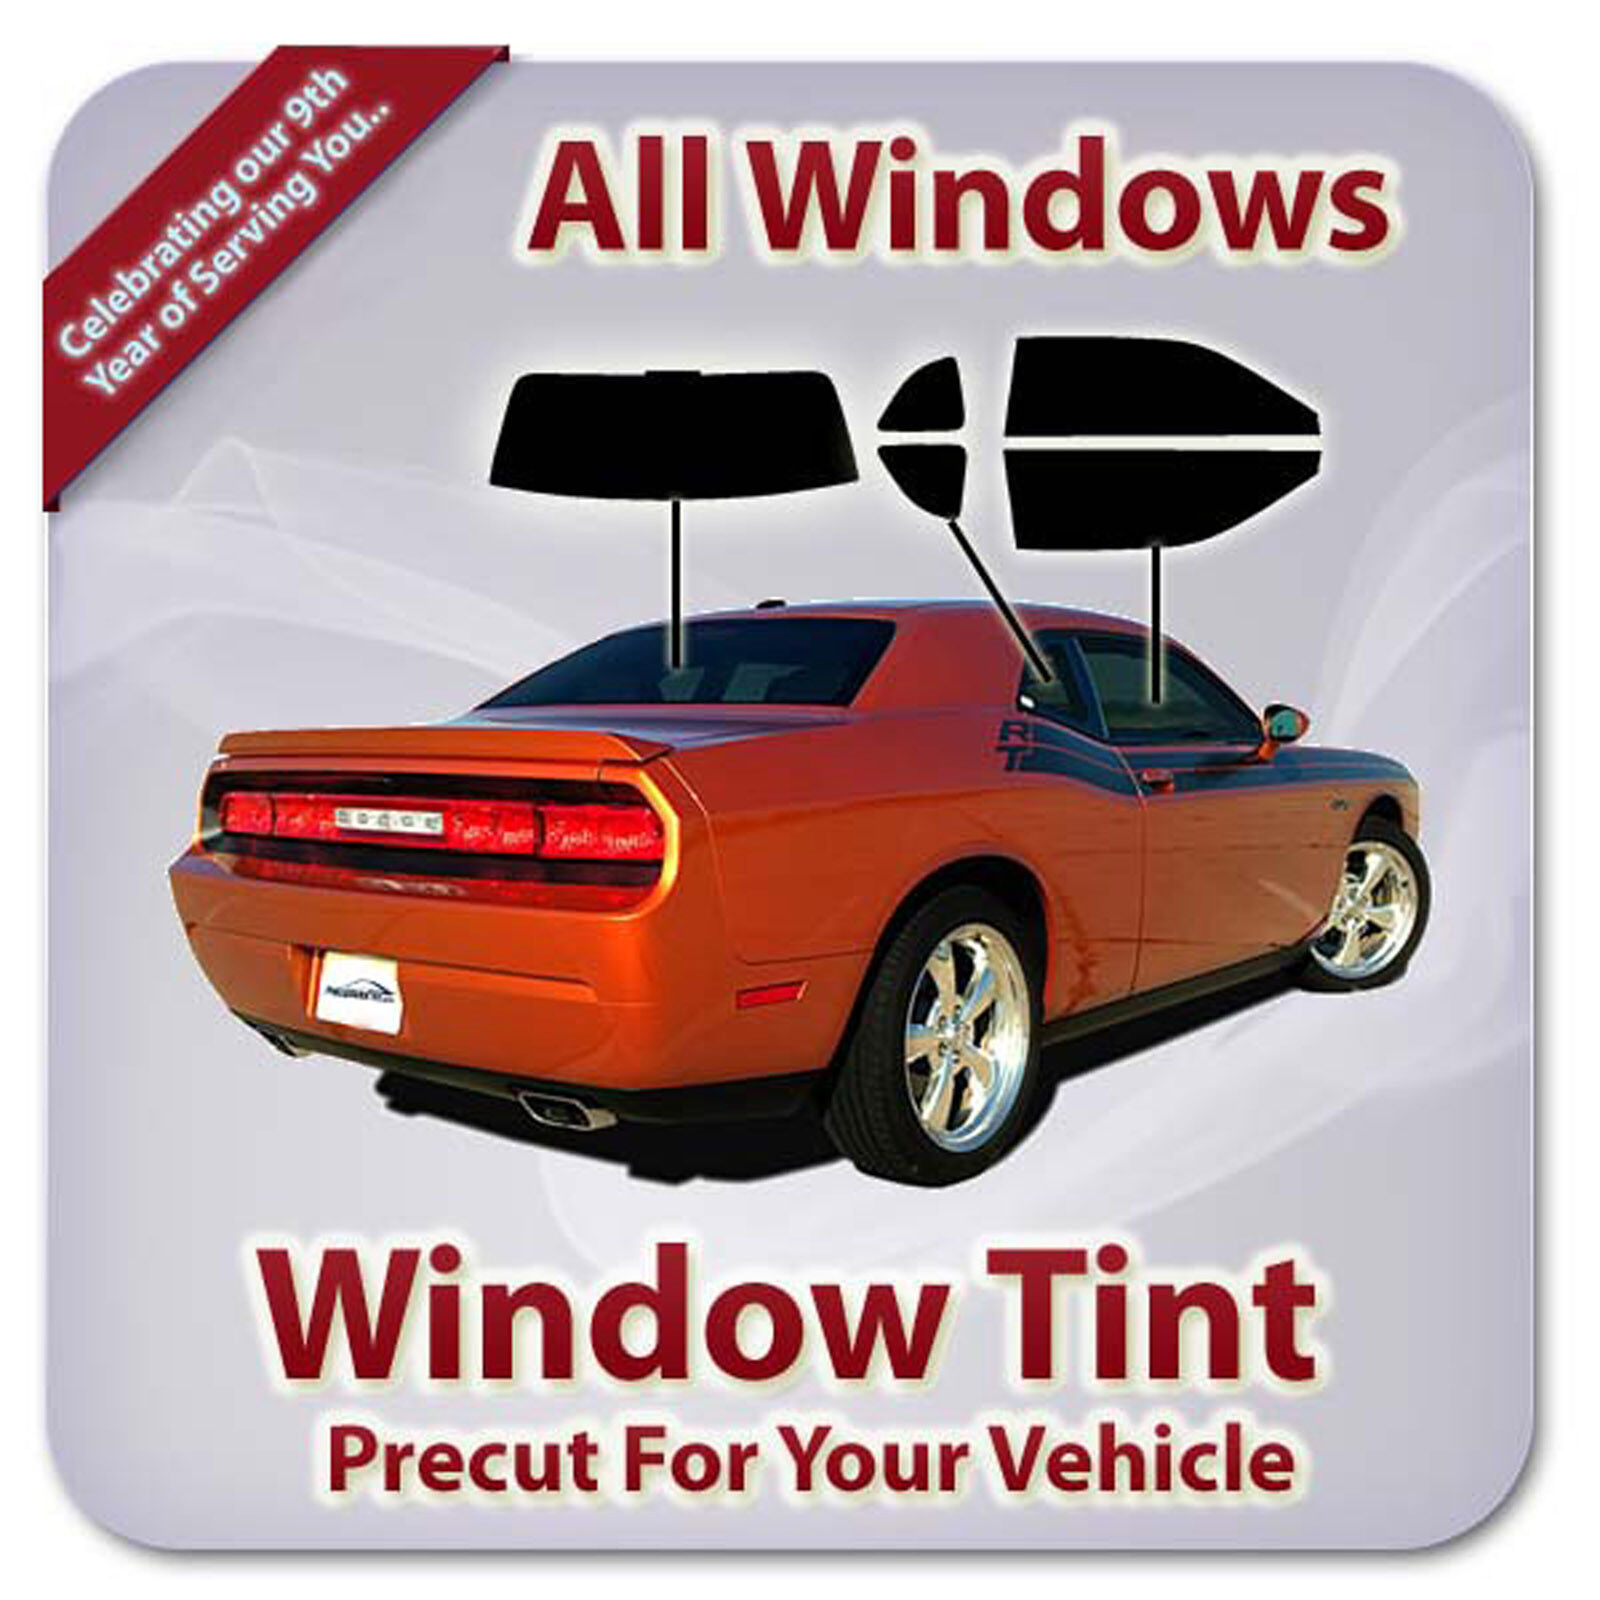 Precut Window Tint For Ford Mustang 1967-1968 (All Windows)